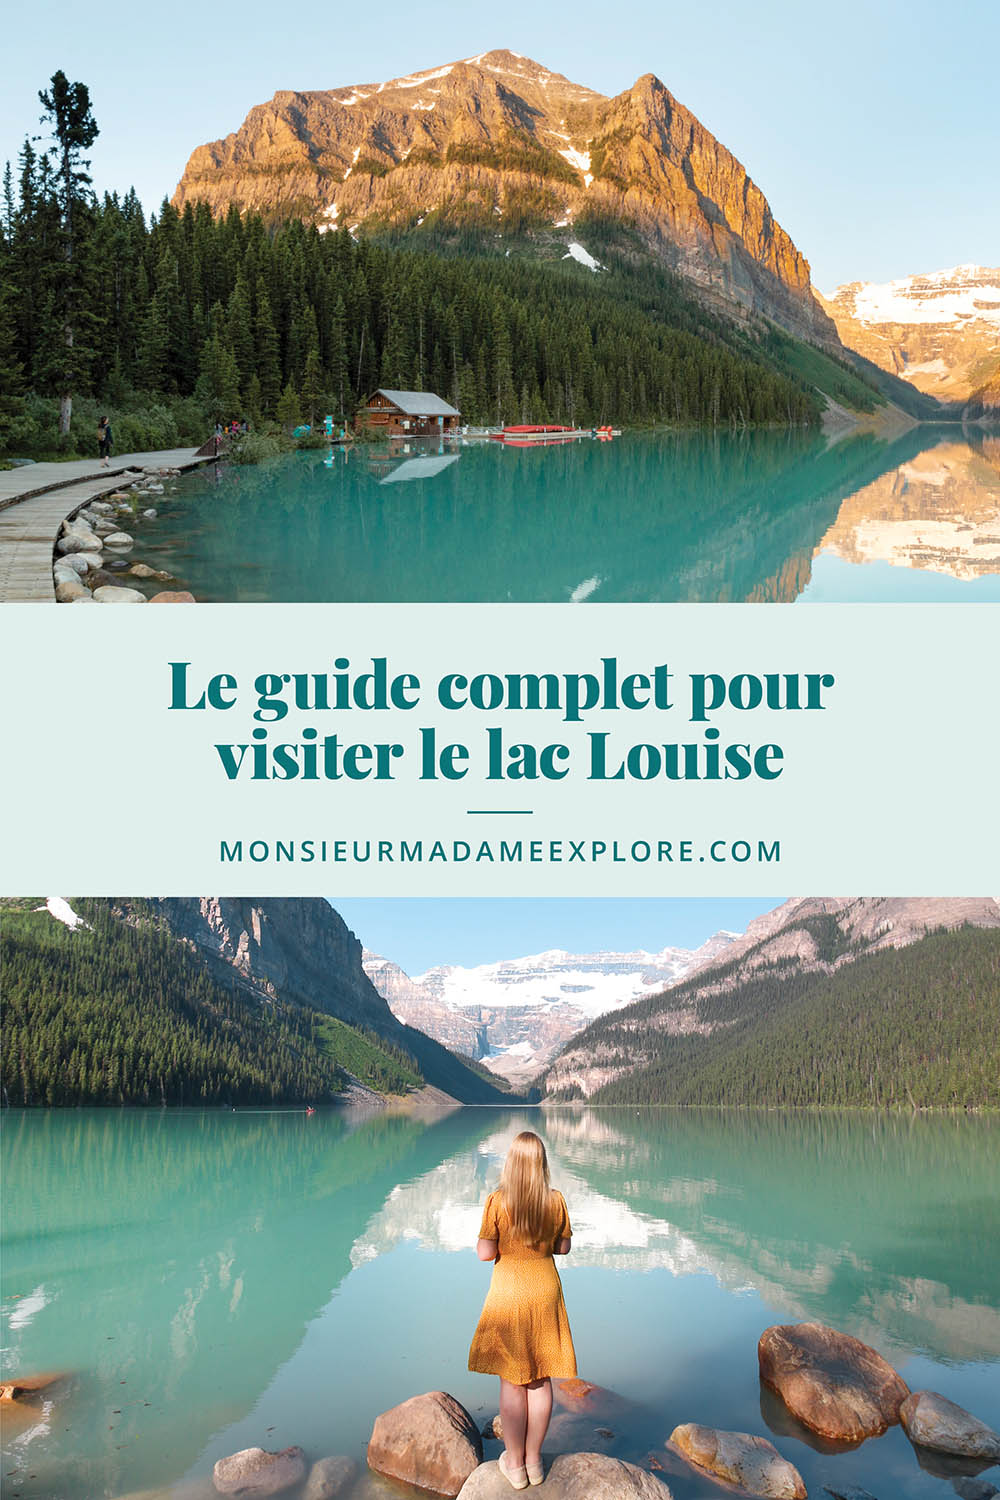 Le guide complet pour visiter le lac Louise, Monsieur+Madame Explore, Blogue de voyage, Rocheuses, Canada / Everything you need to know before visiting Lake Louise, Rockies, Canada